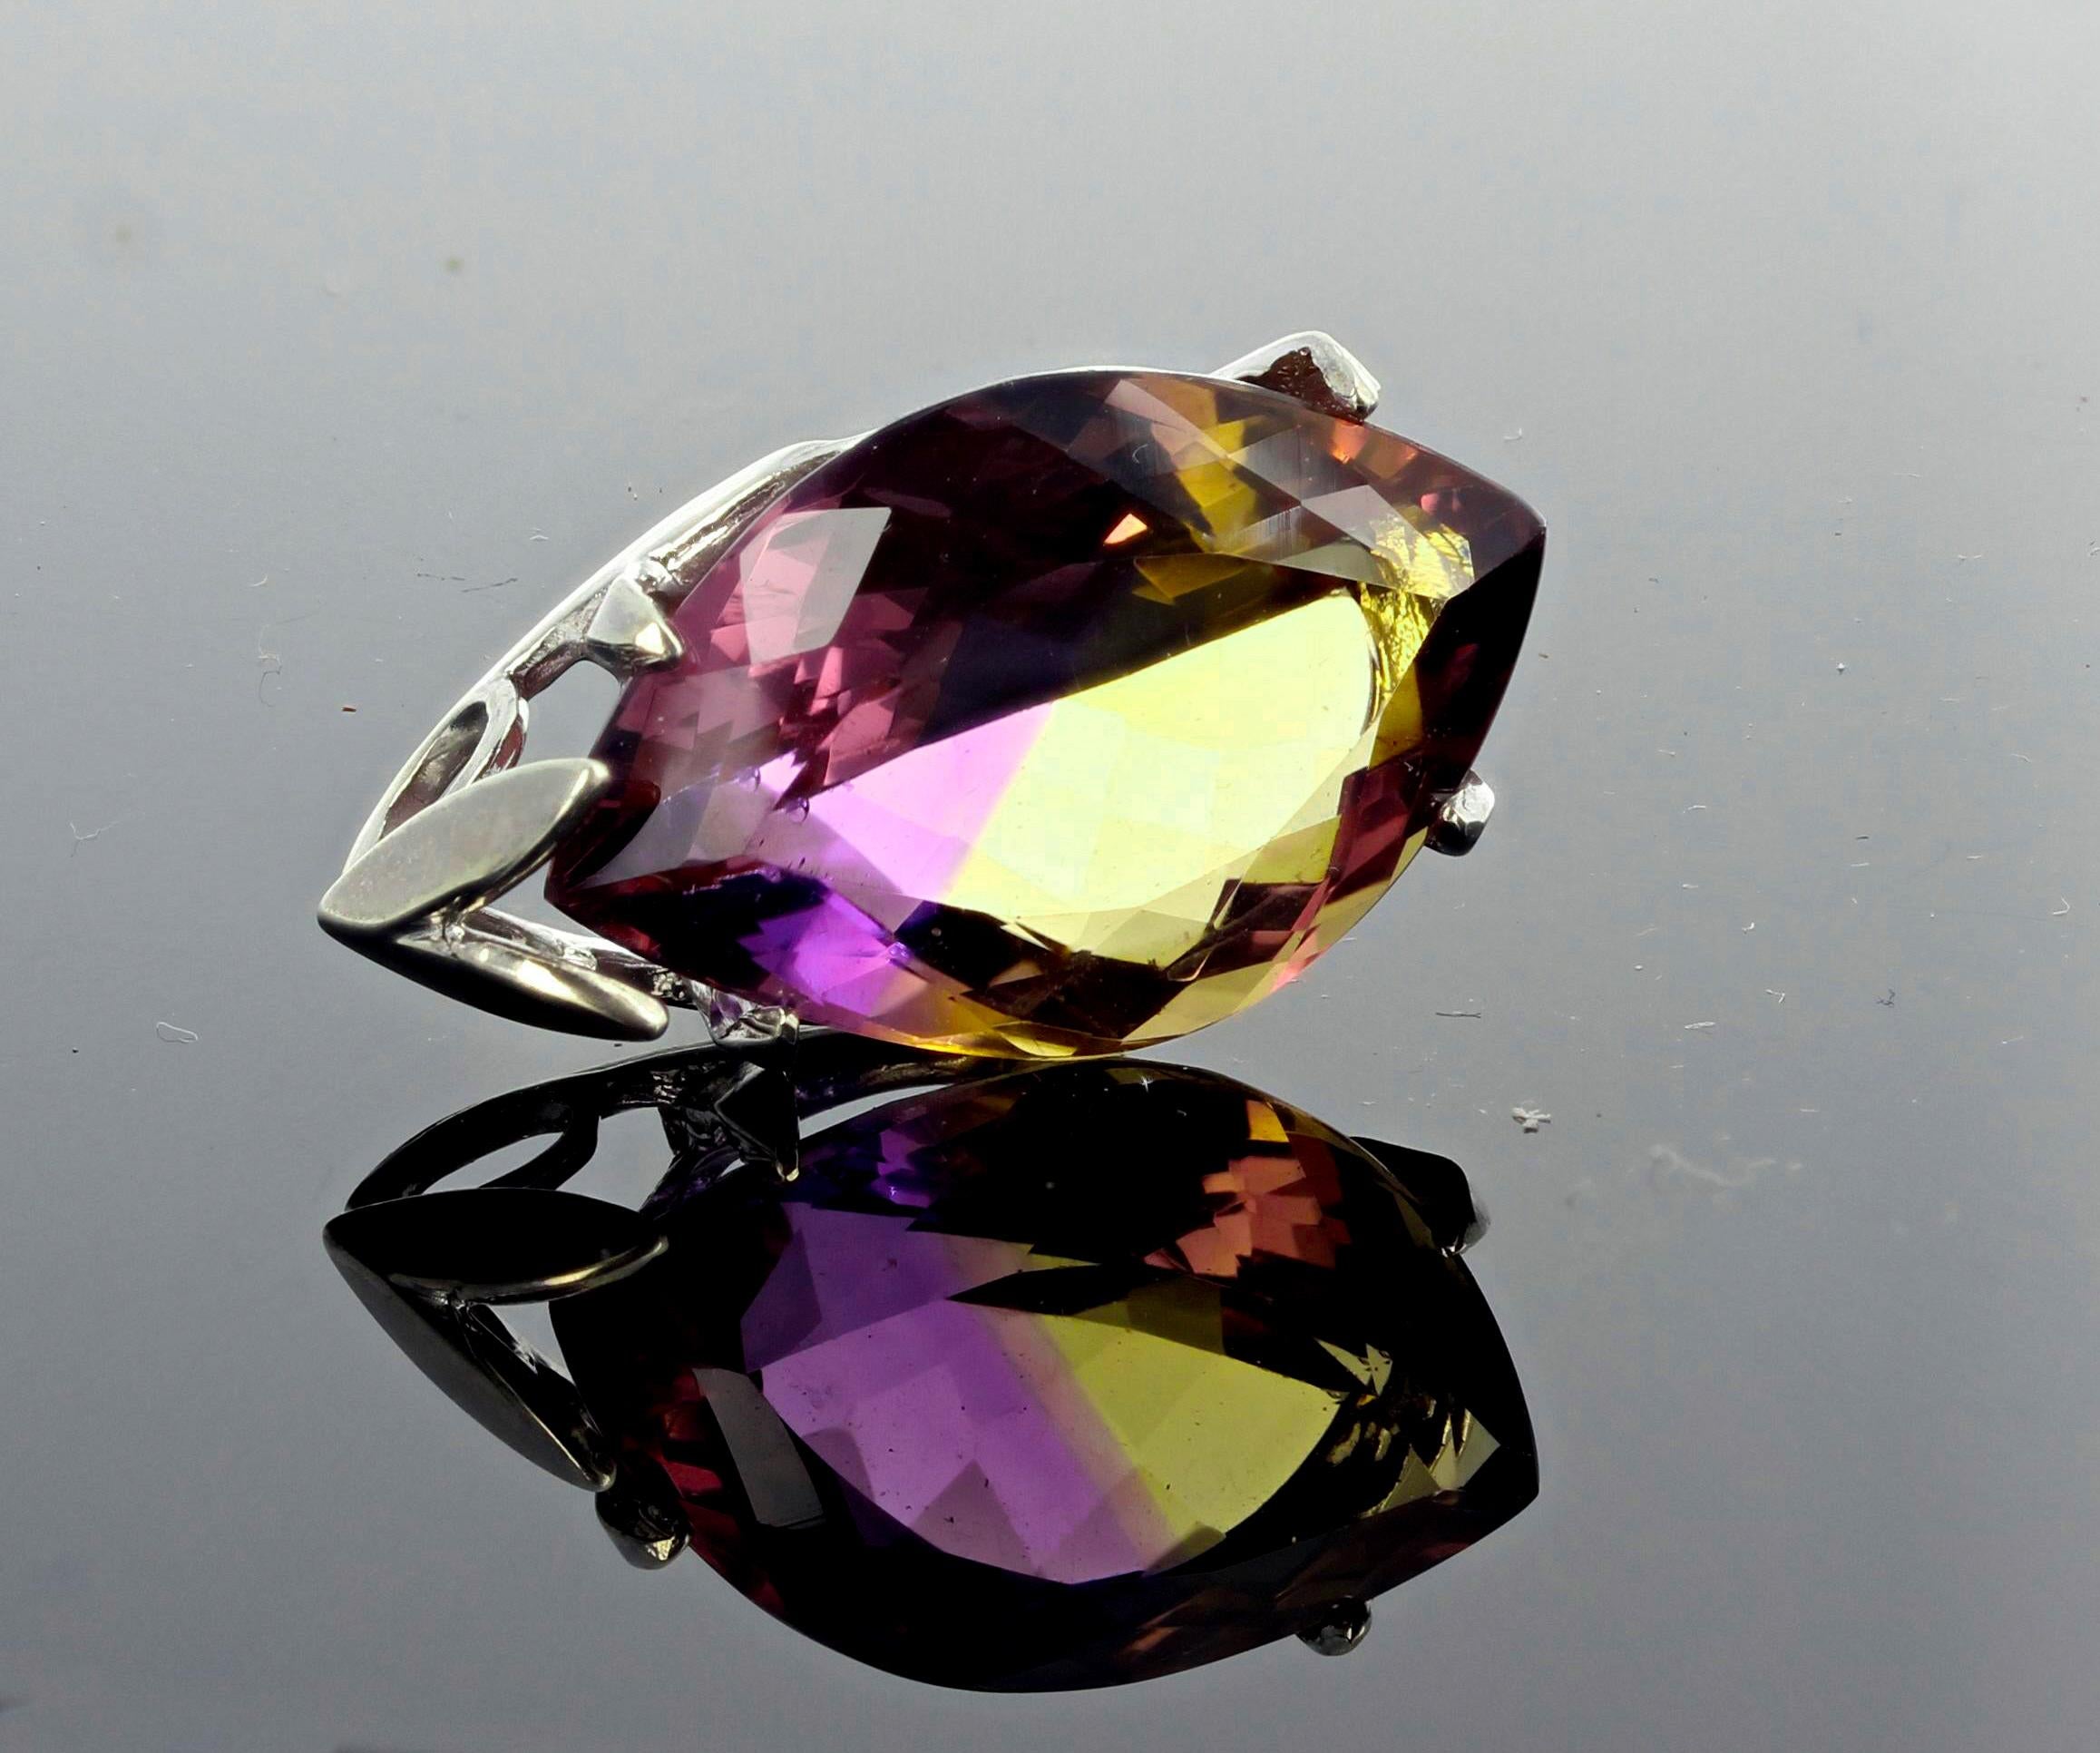 Amazing magic of this 19 carat marquise gem cut Ametrine (part Amethyst part Citrine) set in a sterling silver pendant that hangs approximately 1.15 inches long.  The gemstone is totally natural and measures 26 mm x 15.7 mm).  More from this seller